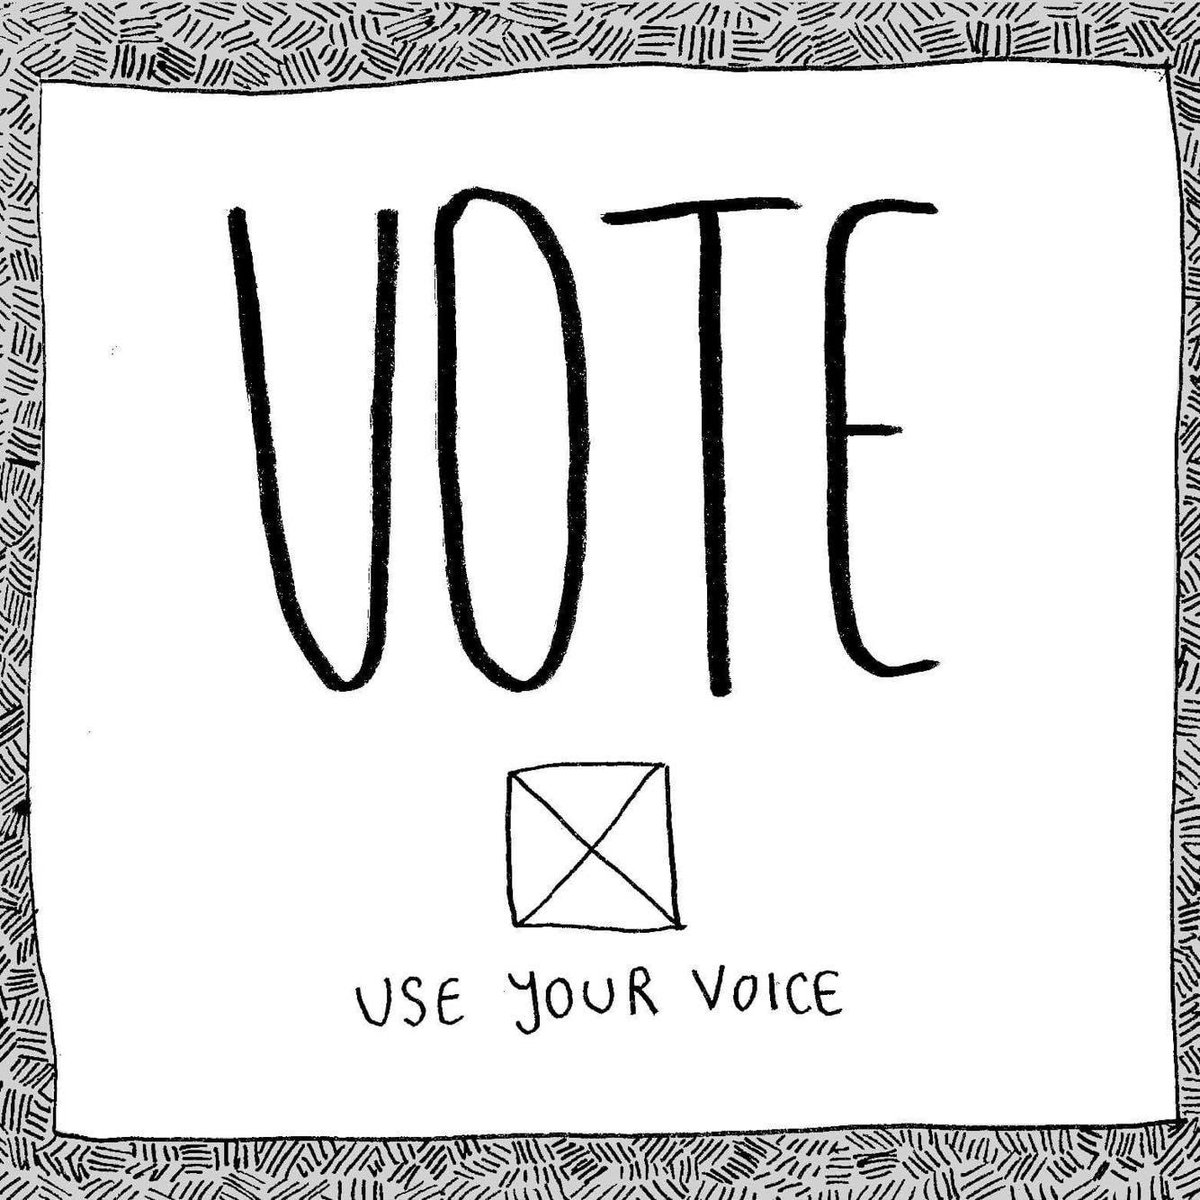 One week left to register for your right to vote in UK election: https://t.co/3FjKcTfIiH #UseYourVoice https://t.co/jP8lWAkARq